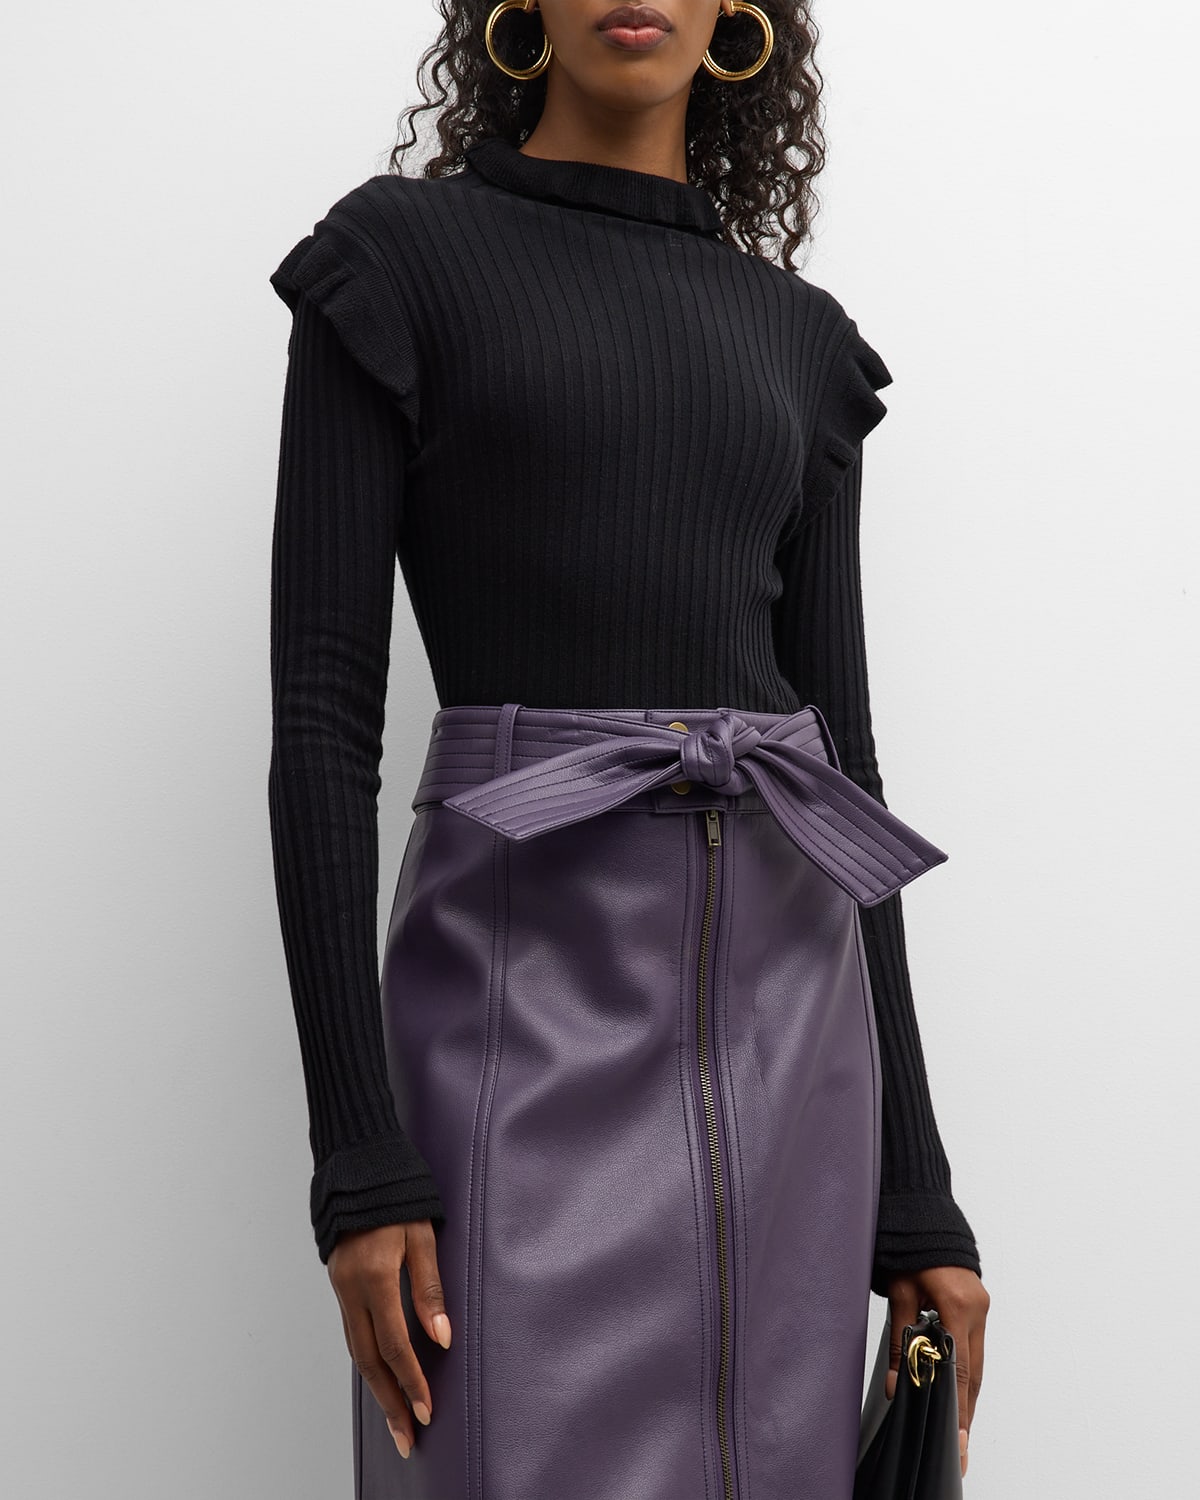 MARIE OLIVER TINLEY RIBBED MOCK-NECK RUFFLE-TRIM SWEATER